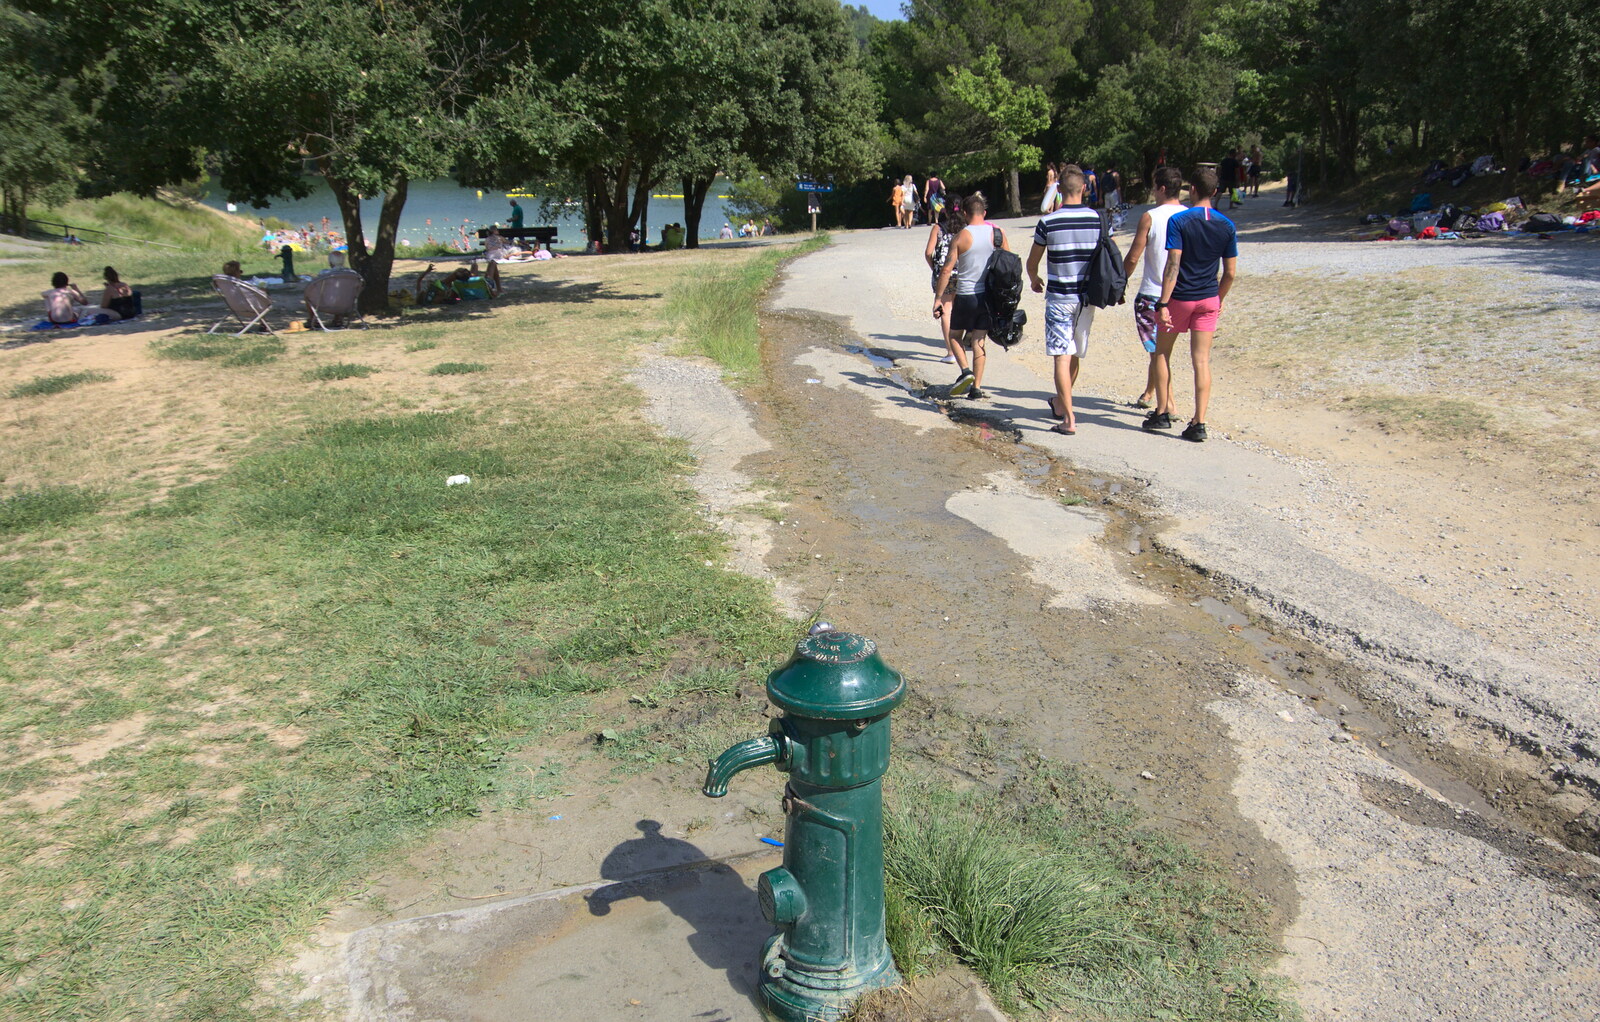 A water hydrant is leaking from Le Gouffre Géant and Grotte de Limousis, Petanque and a Lightning Storm, Languedoc, France - 12th August 2018